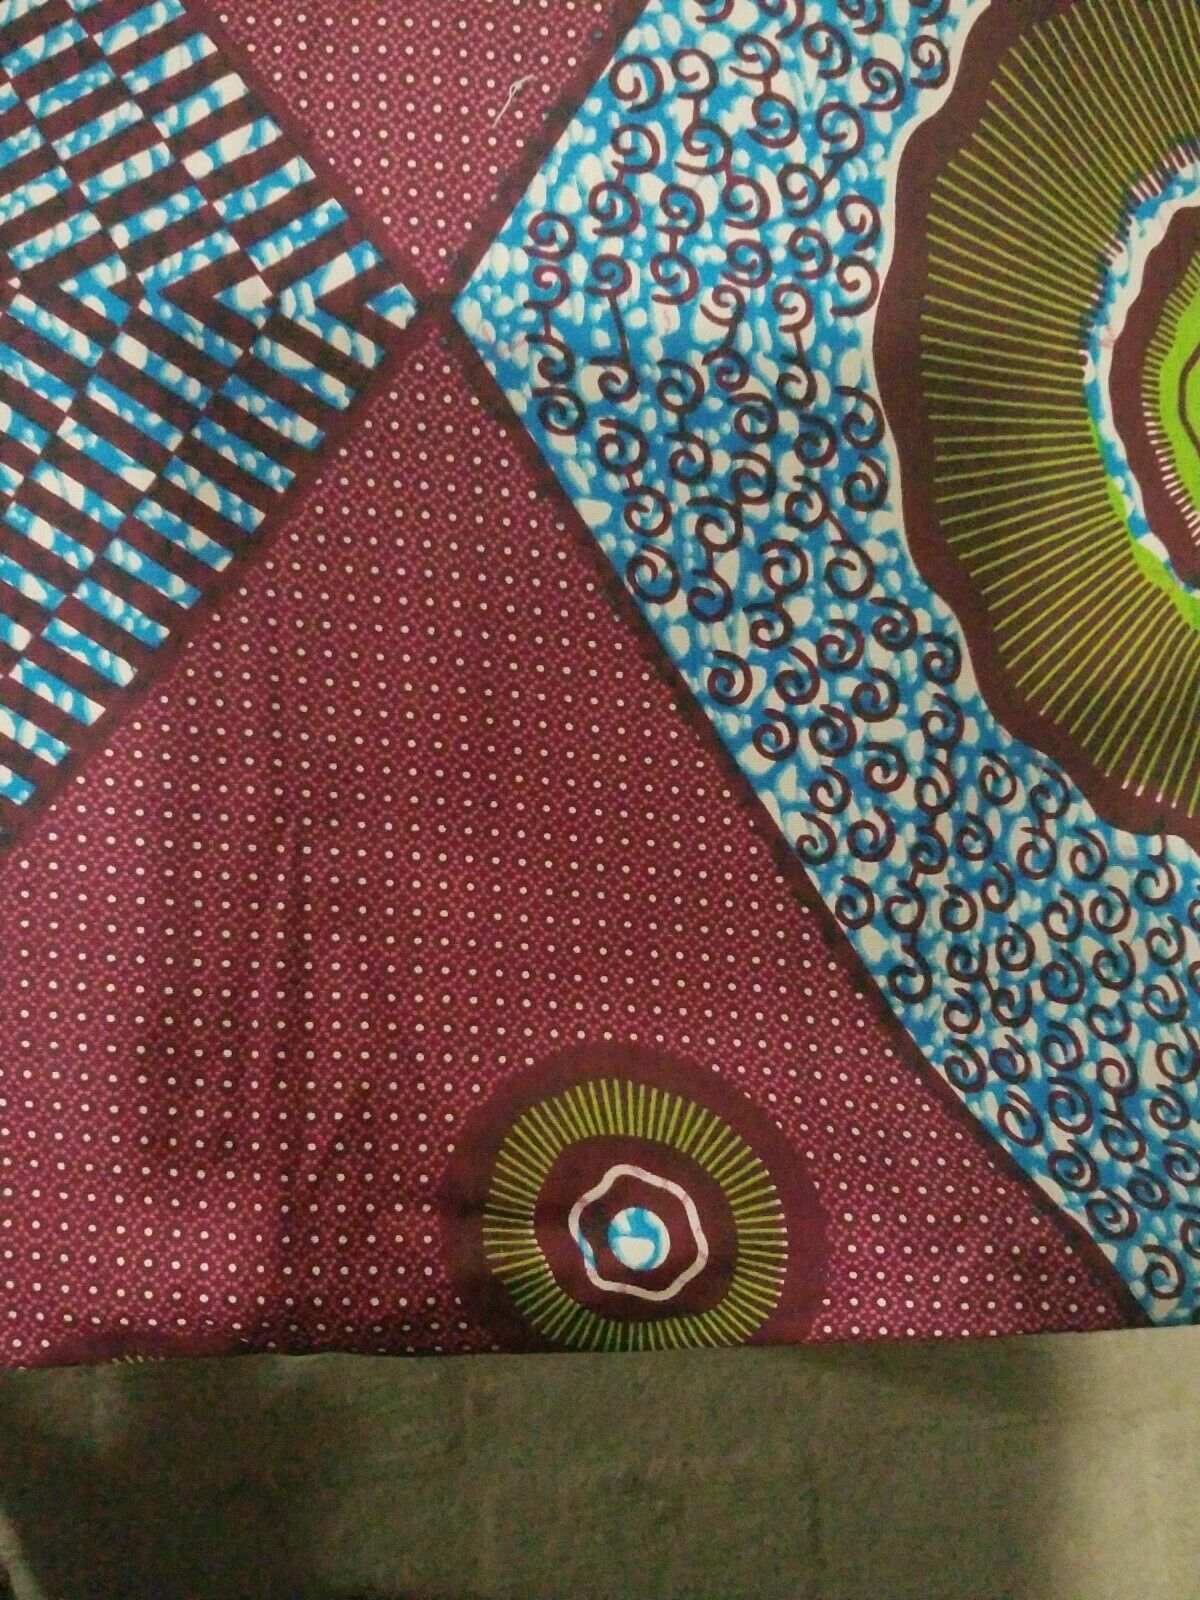 Brown MultiAfrican Print 100% Cotton Fabric ~2yards×23"~$8.50